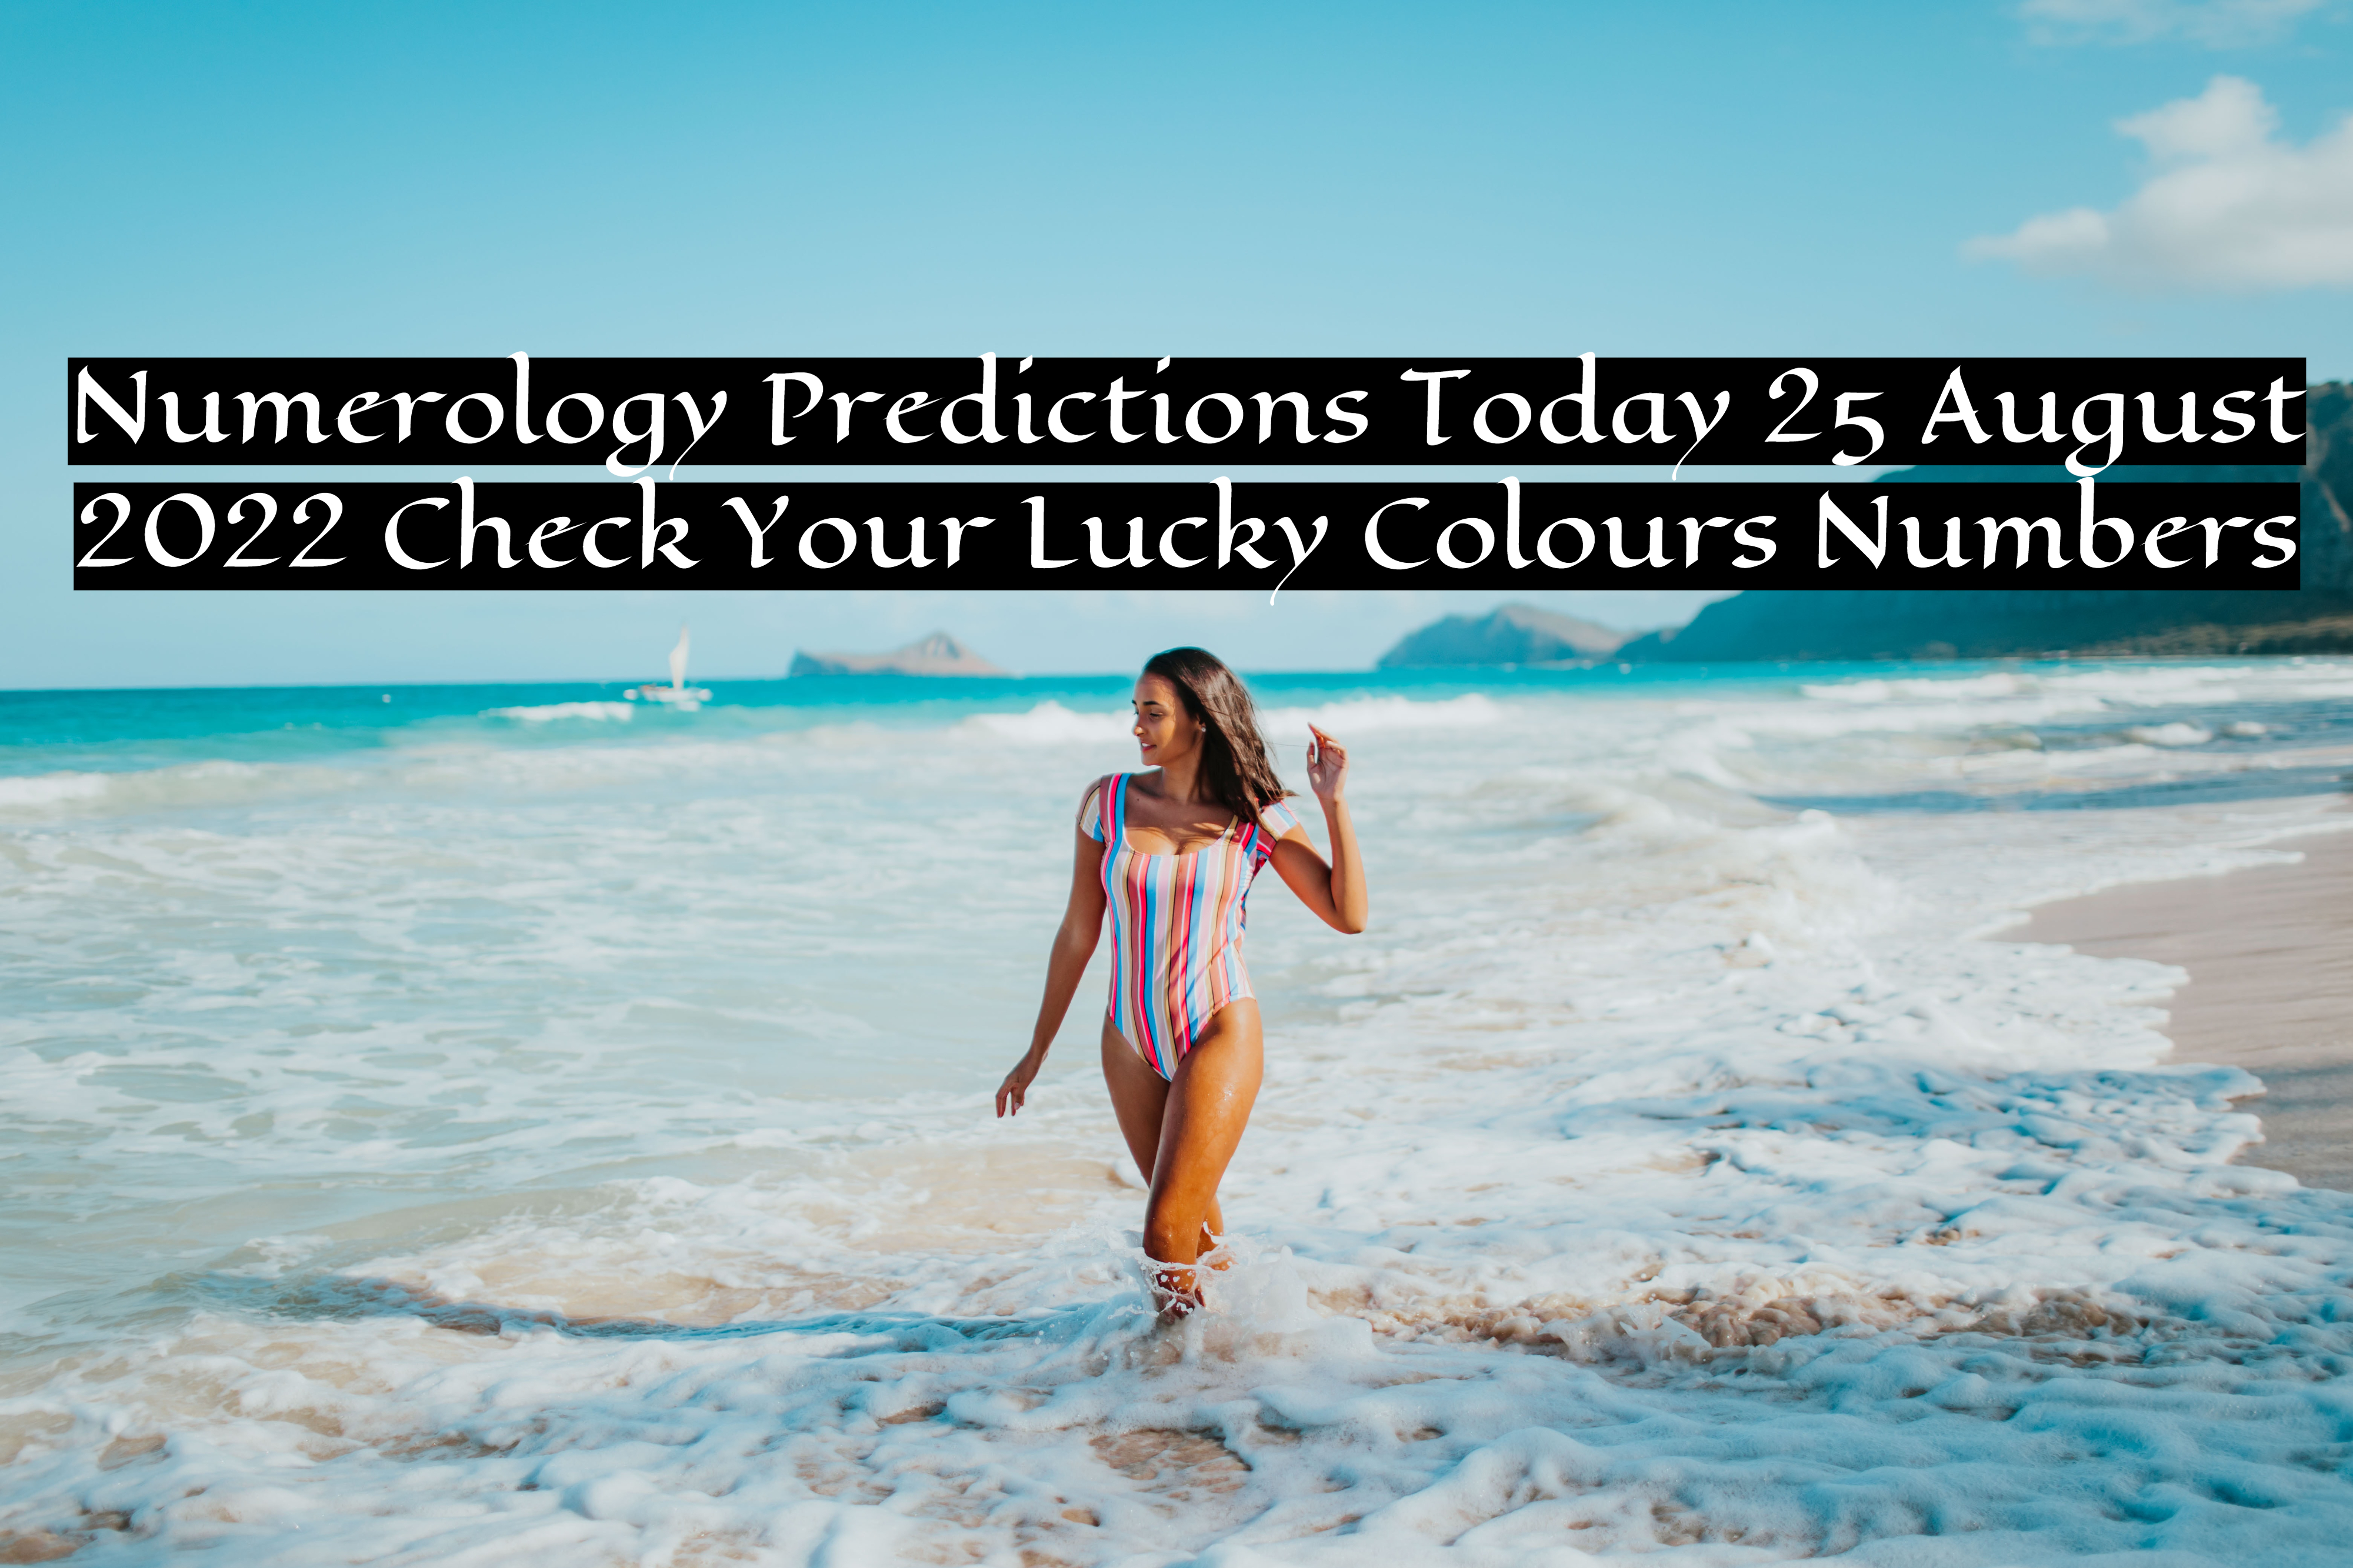 Numerology Predictions Today 25 August 2022 Check Your Lucky Colours Numbers